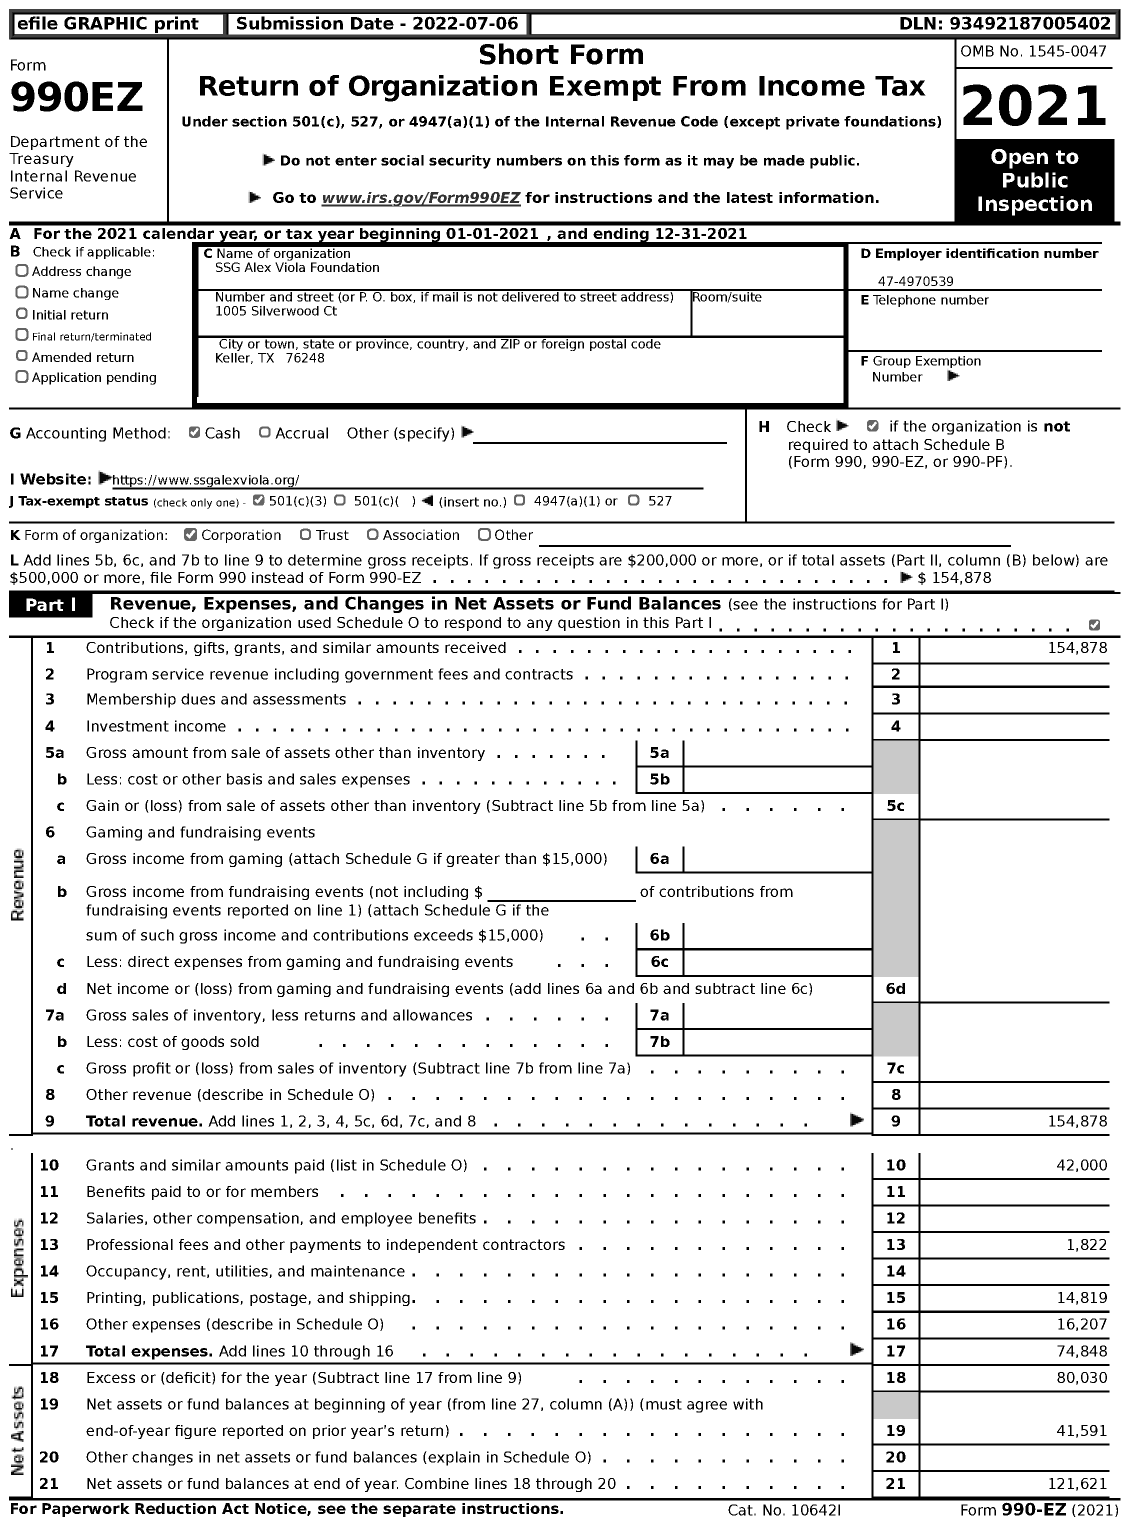 Image of first page of 2021 Form 990EZ for SSG Alex Viola Foundation